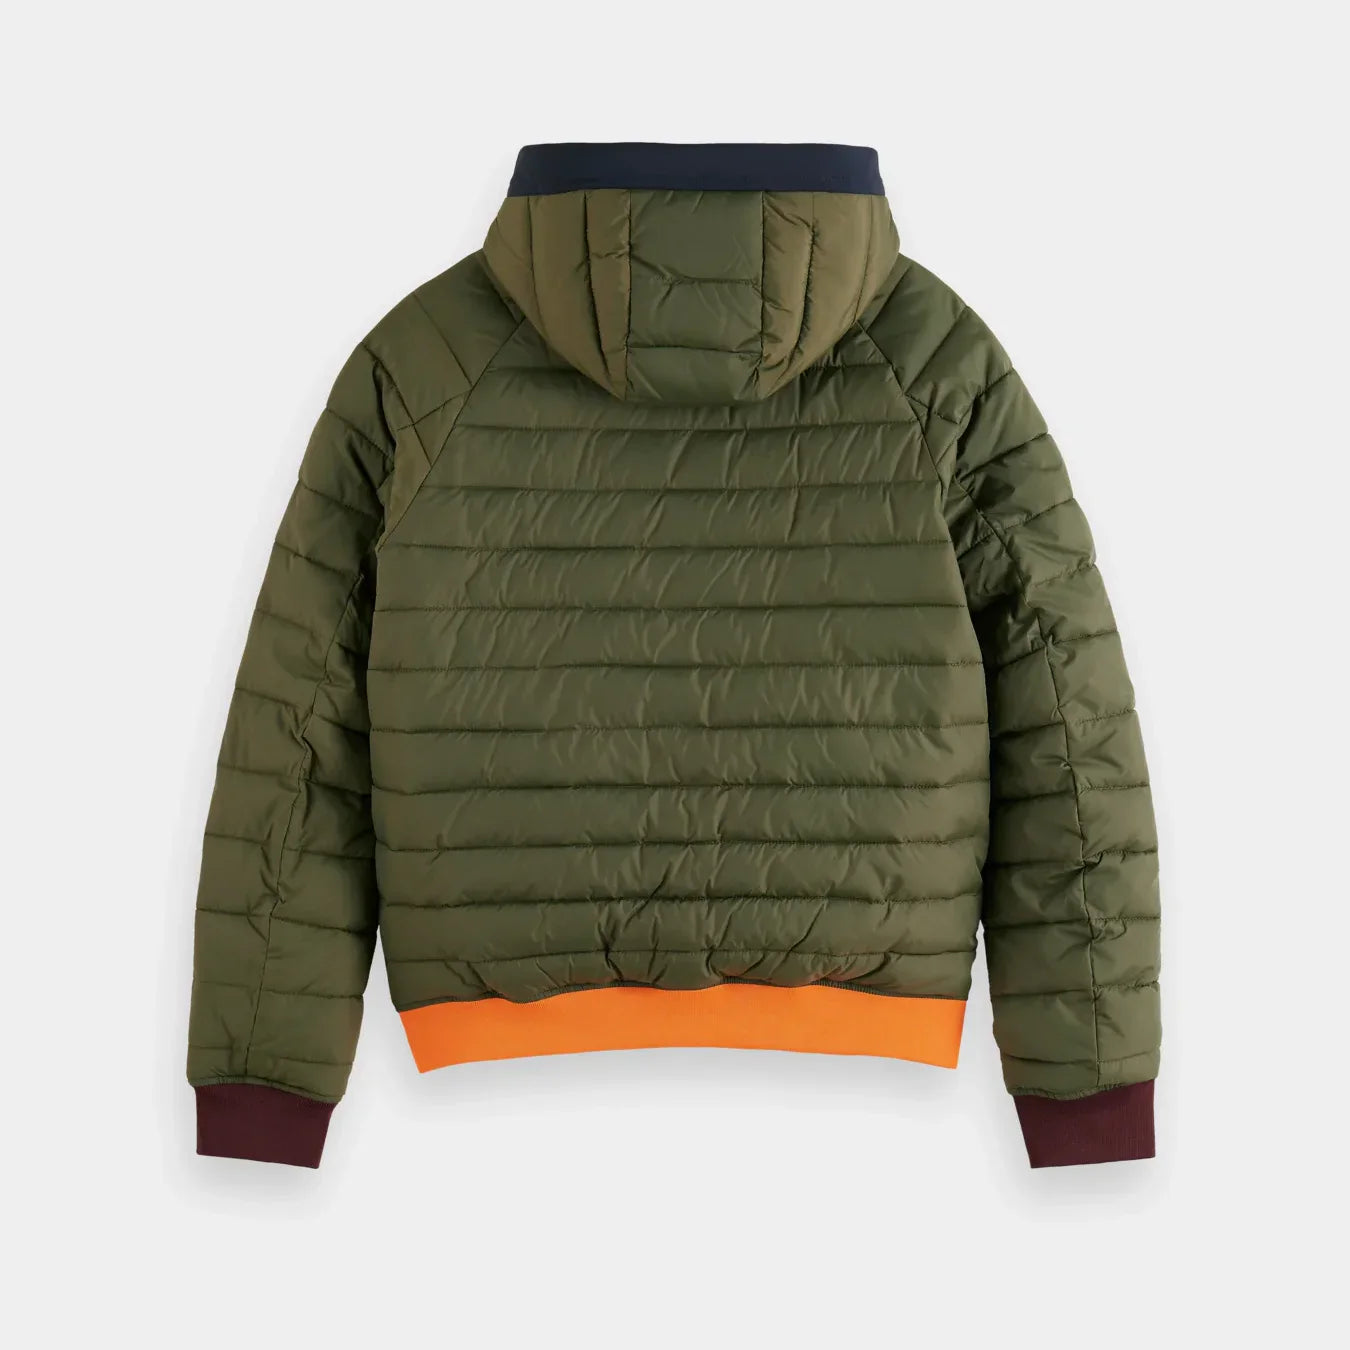 'Scotch & Soda Colourblock Quilted Bomber Jacket' in 'Military' colour